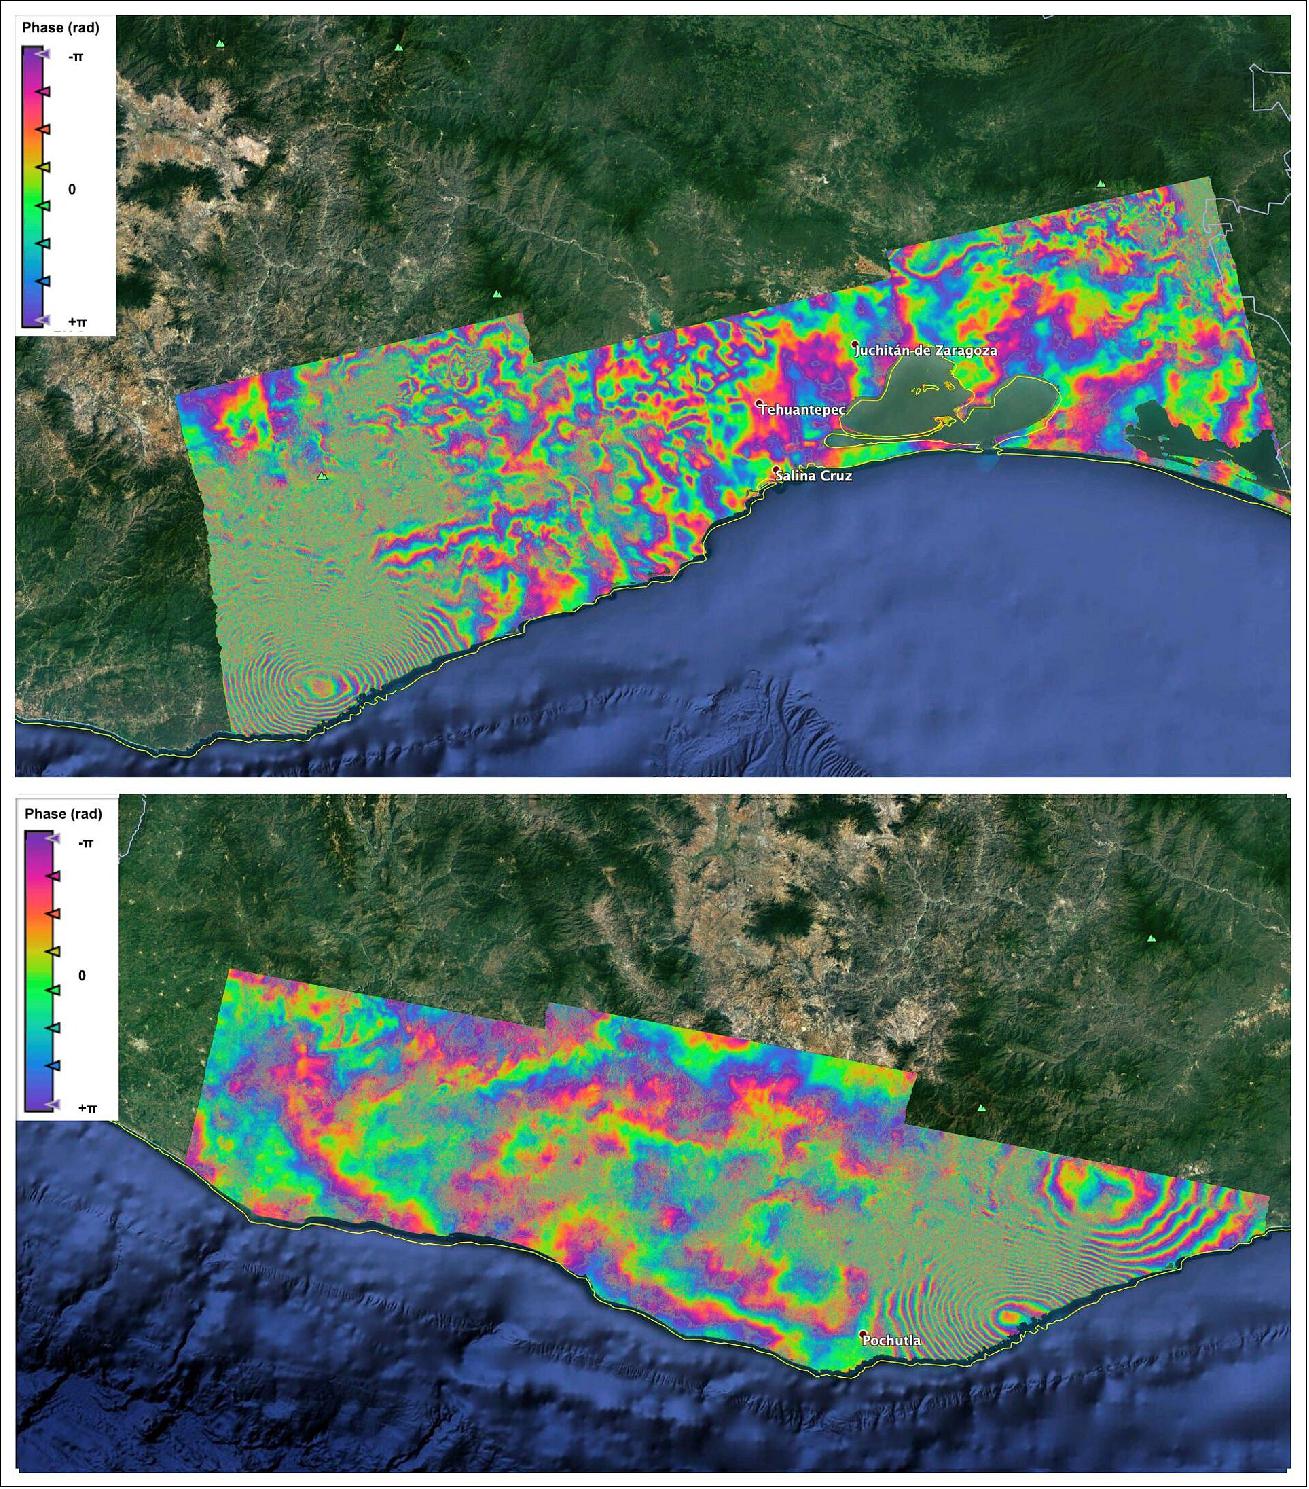 Figure 15: Interferogram showing the coseismic surface displacement in the area of Oaxaca, Mexico, generated from multiple Sentinel-1 scans – before and after the 23 June earthquake. By combining data from the Copernicus Sentinel-1 mission, acquired before and after the earthquake, changes on the ground that occurred between the two acquisition dates lead to the colorful interference patterns in the images, known as an 'interferogram', enabling scientists to quantify the ground movement (image credit: ESA, the image contains modified Copernicus Sentinel data (2020), processed by ESA, CC BY-SA 3.0 IGO)